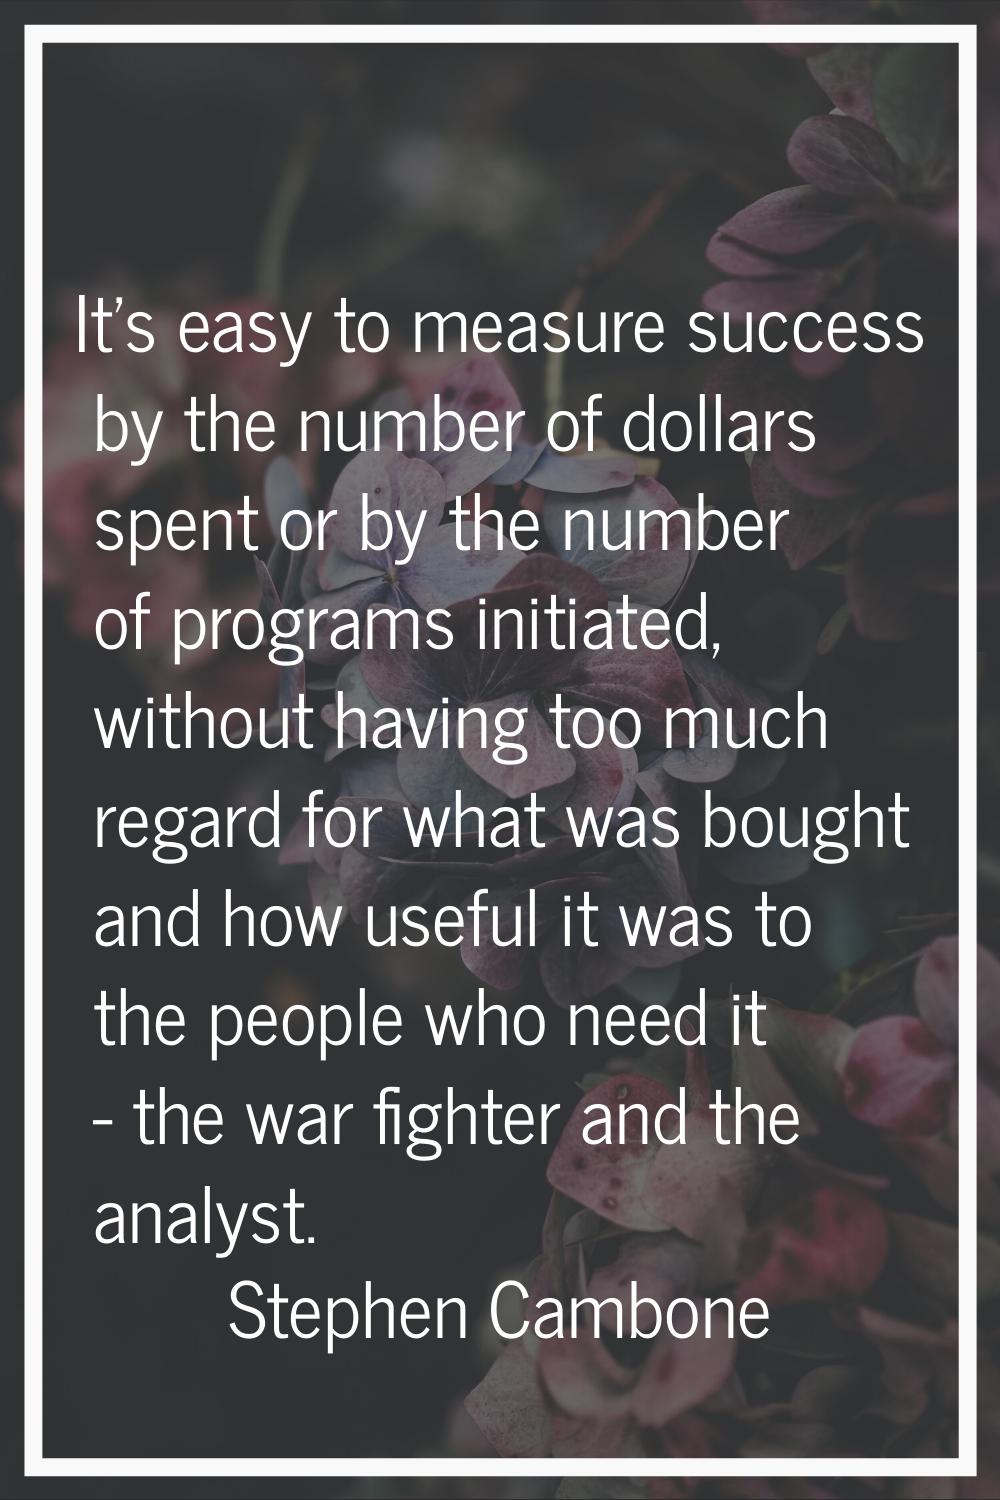 It's easy to measure success by the number of dollars spent or by the number of programs initiated,